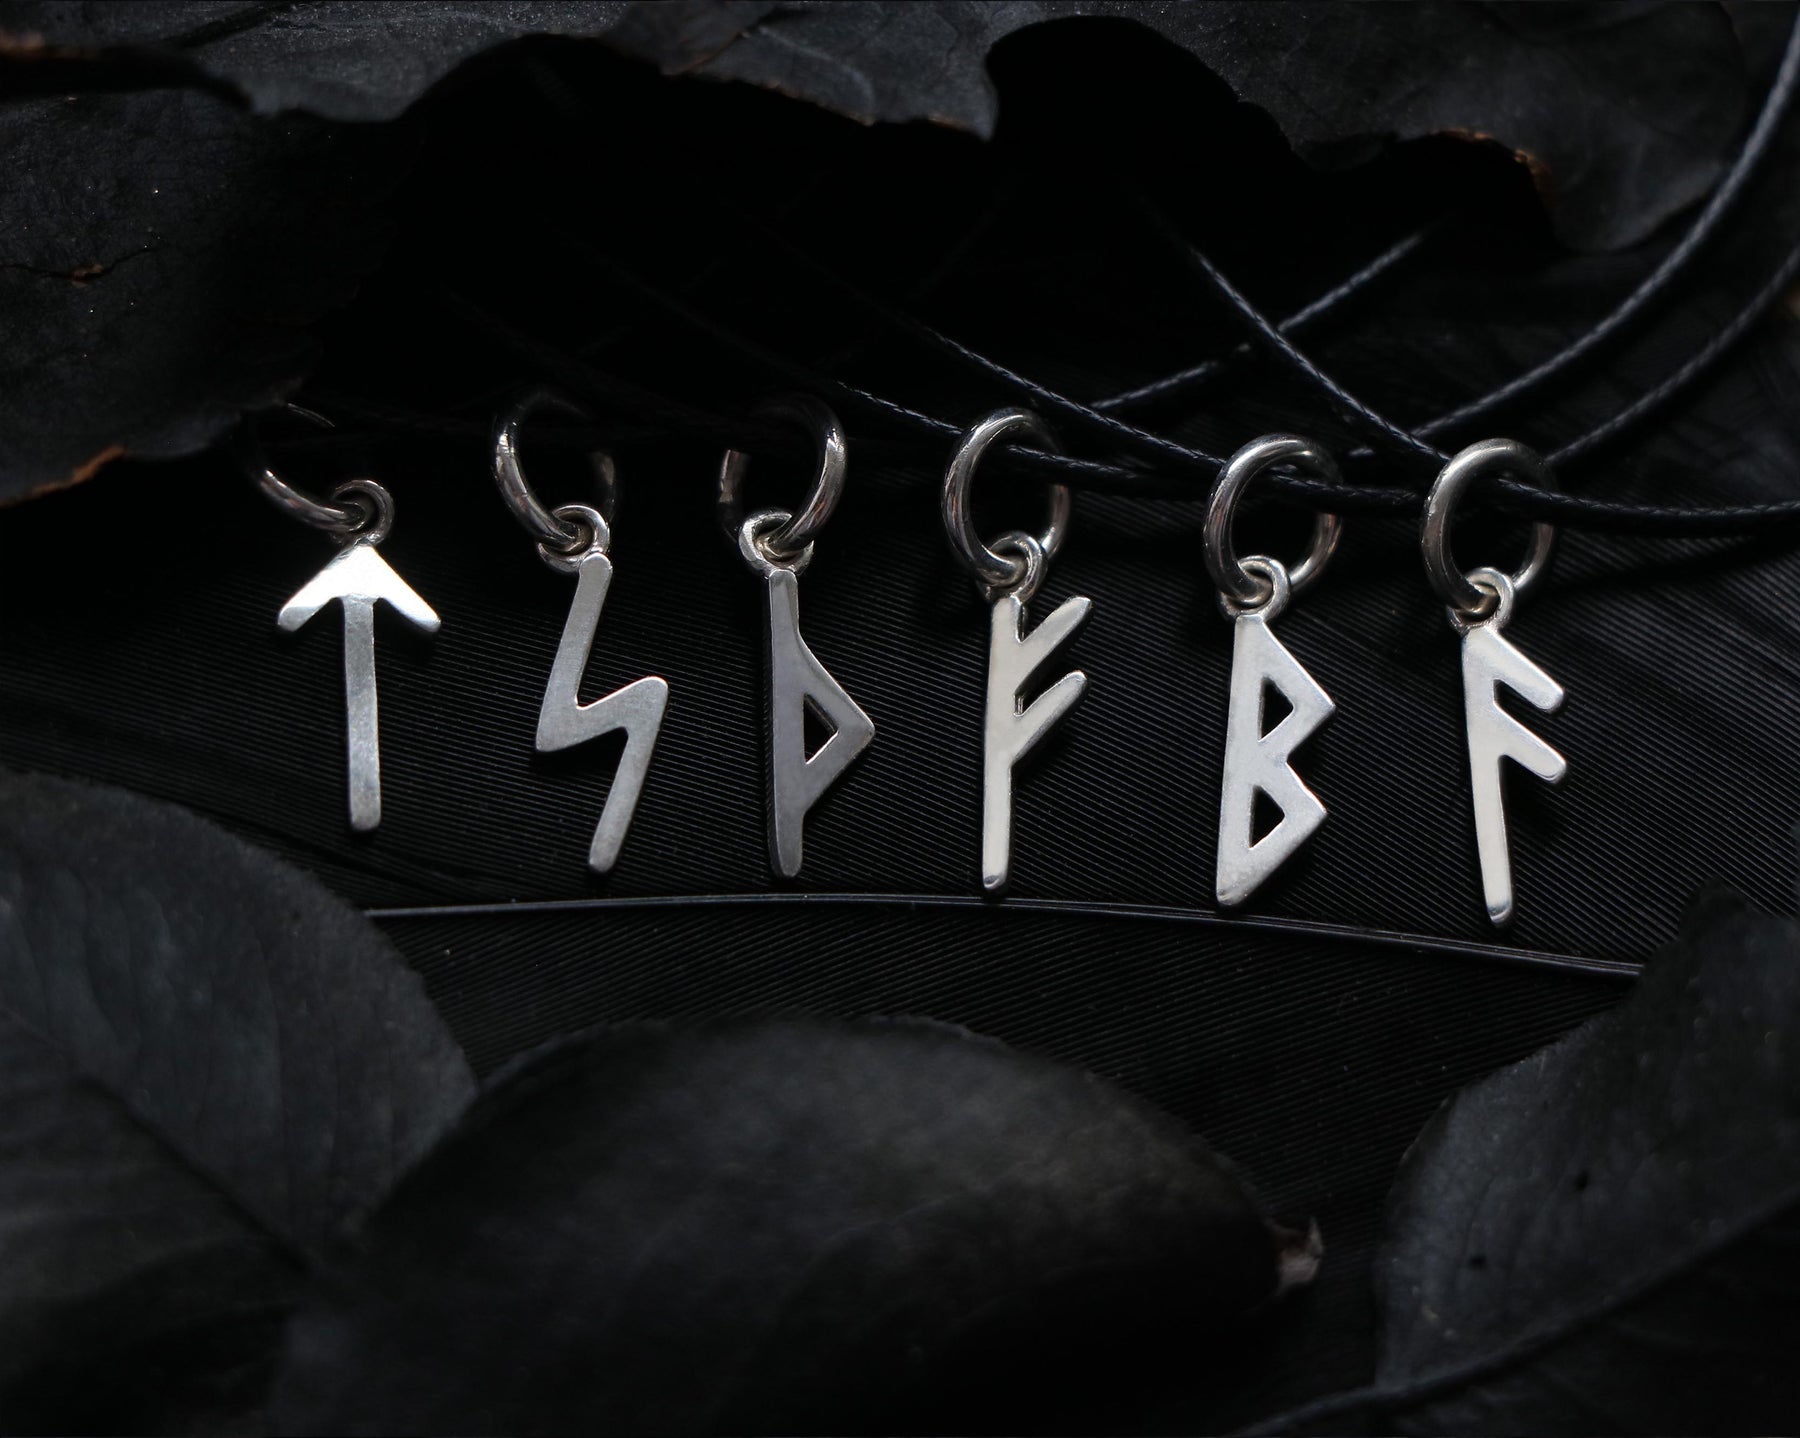 Mini RUNES necklaces - 925 STERLING SILVER